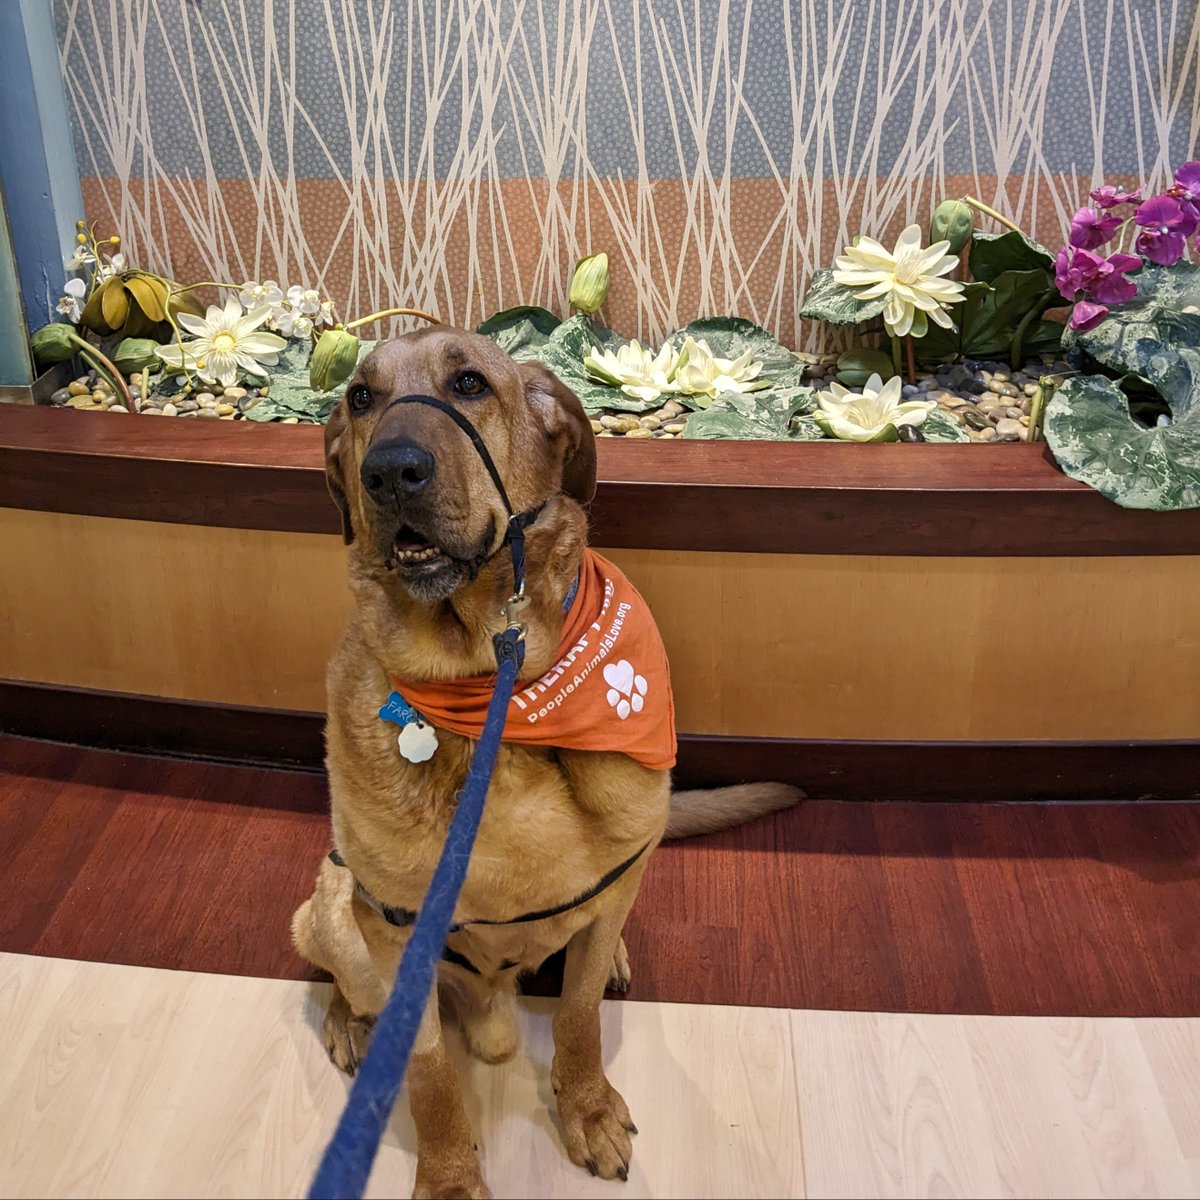 Who's a good boi? Faroe, the GW Cancer Center's therapy dog, is! Patients in the infusion center ❤️ him, and his visits make their day that much better! #therapydogs #GWcancerCenter #mustlovedogs